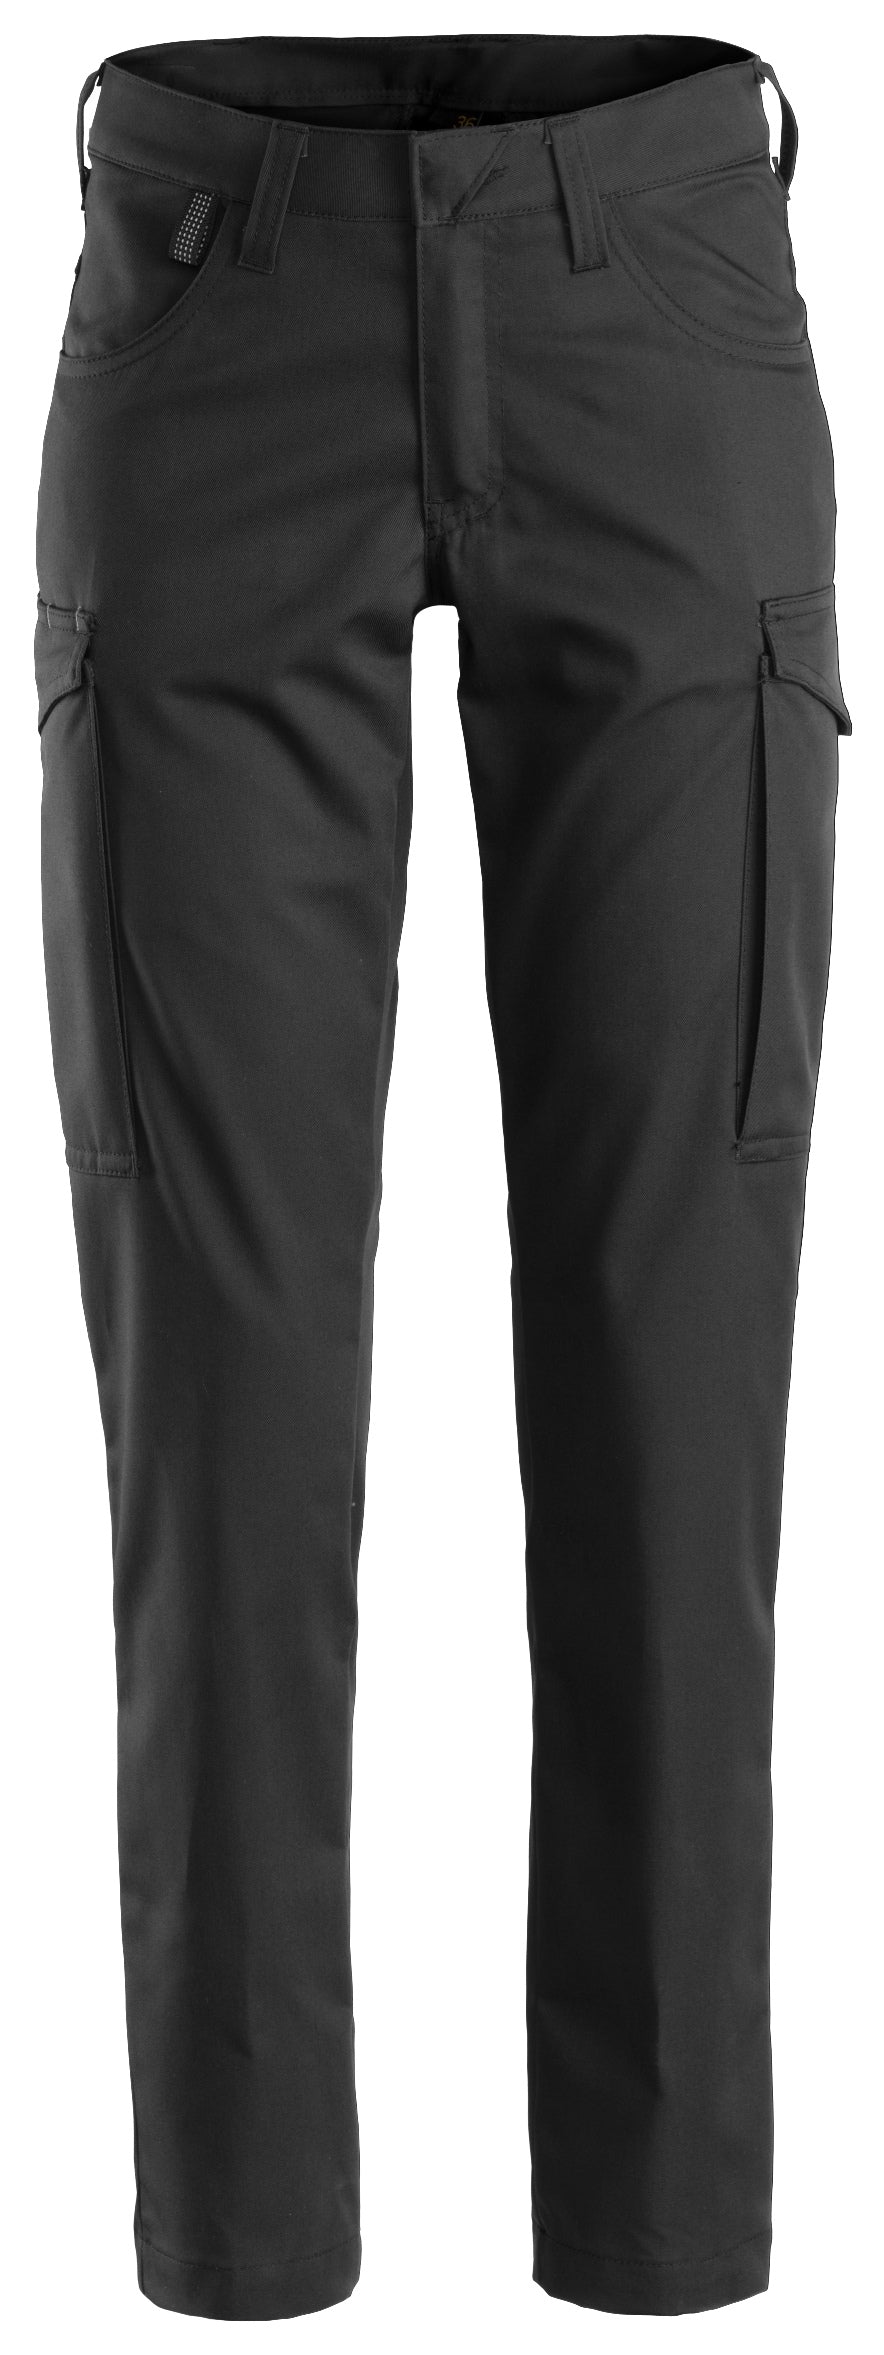 Snickers 6700 Womens Service Trousers Black